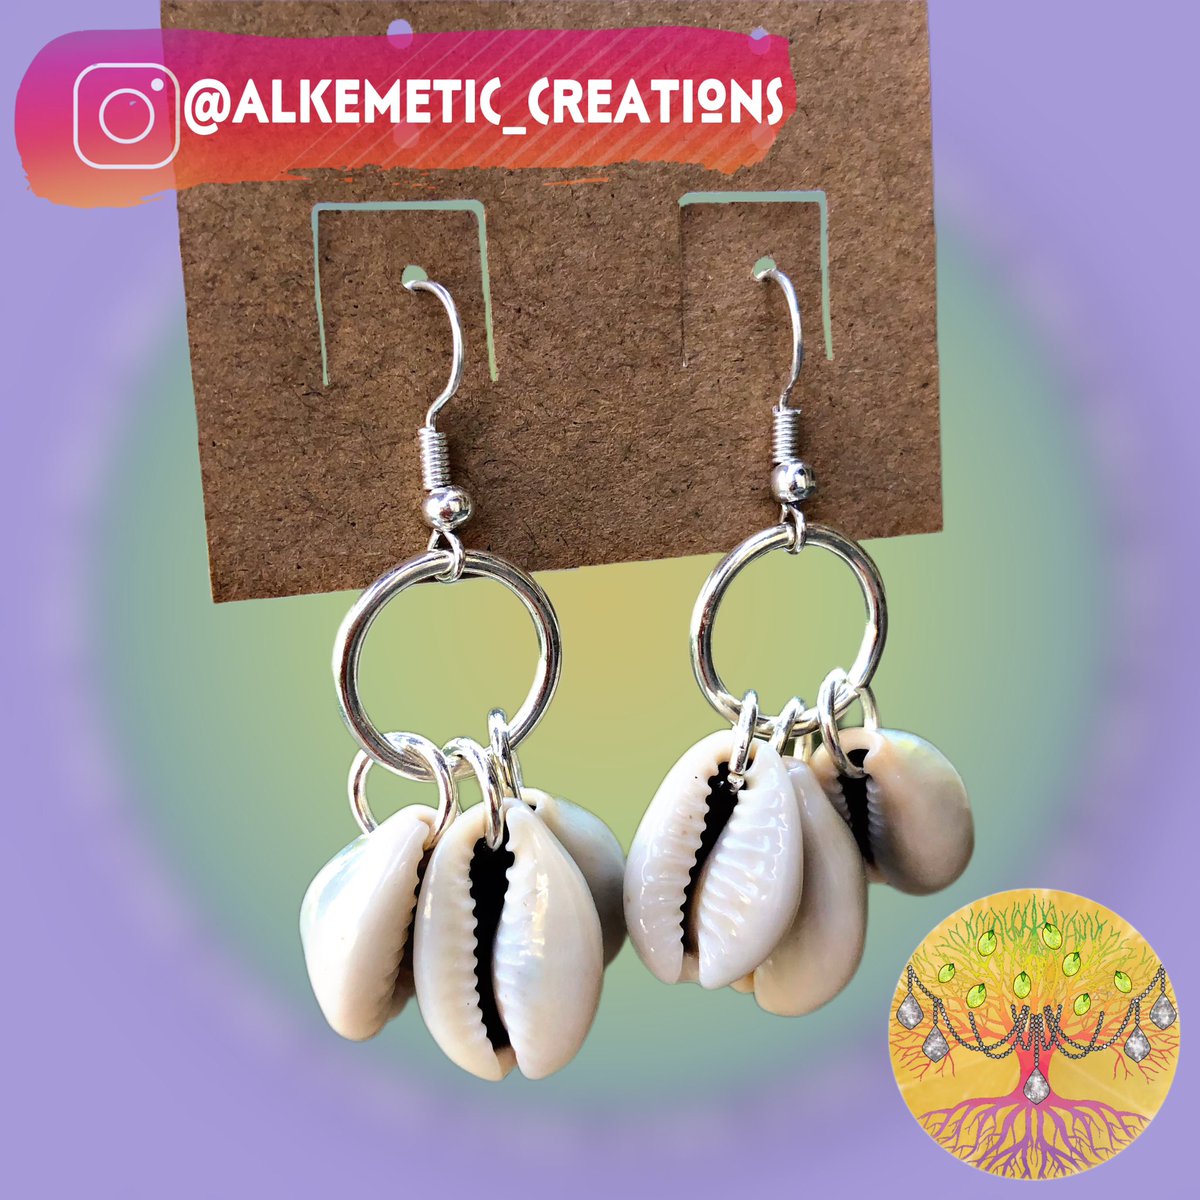 Cowrie Shell 🐚 & Silver Circles Dangle Earrings. 

#etsy #silver #cowrieshell #shellearrings #healingjewelry #smallbusinessowners #shopblackowned #blackbusinesswomen #blackbusinessowner #entrepreneur #jewelrymaker #etsy #spiritual #consciousness #healing #alkemeticcreations